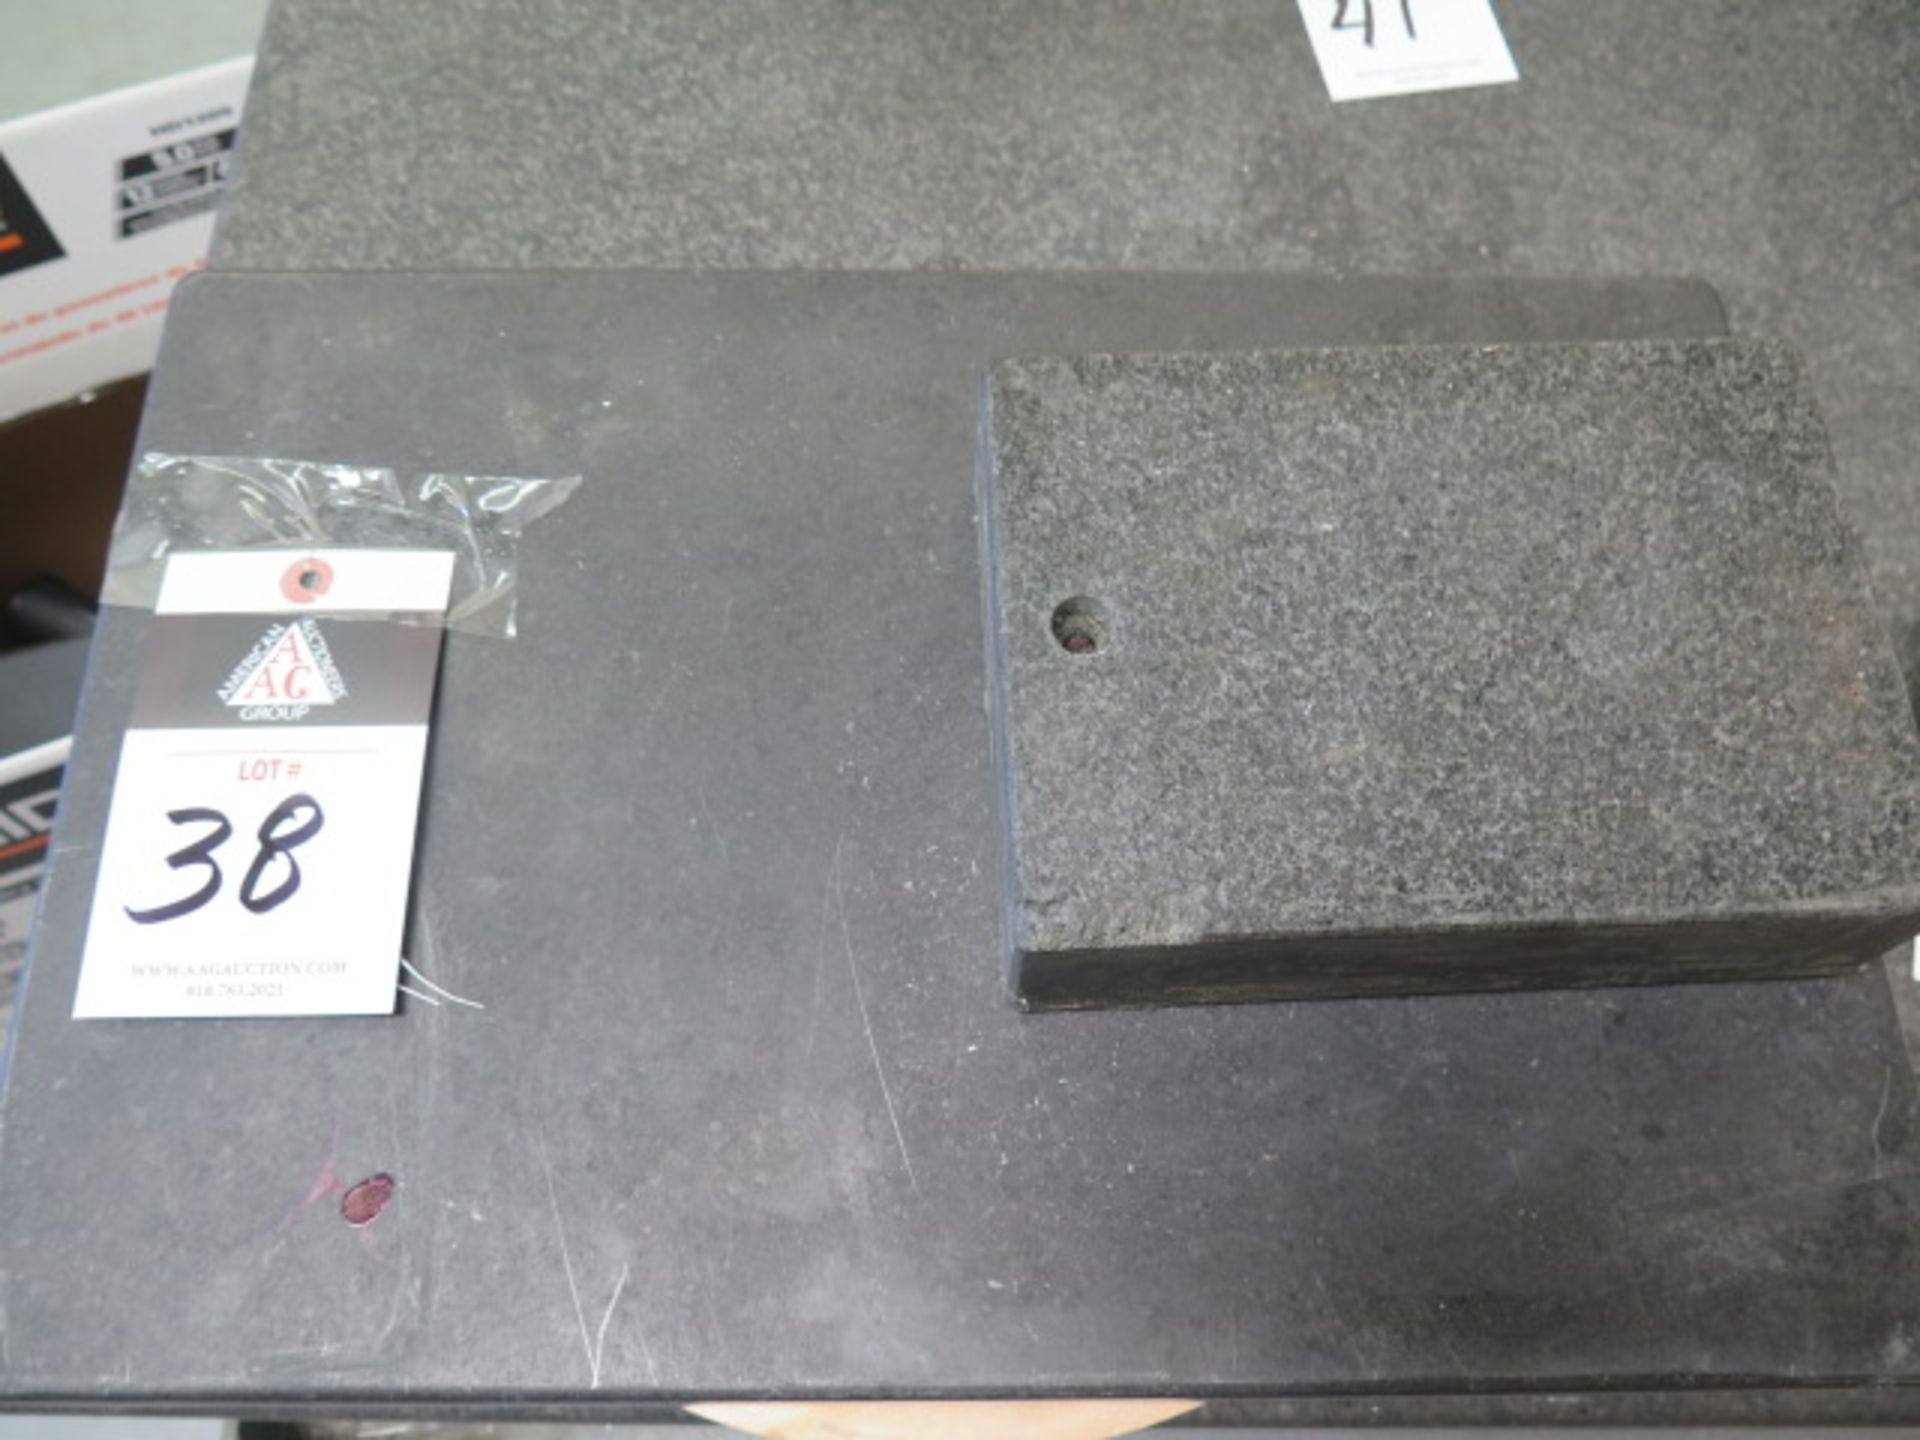 12” x 18” x 3” Granite Surface Plate (SOLD AS-IS - NO WARRANTY) - Image 2 of 4